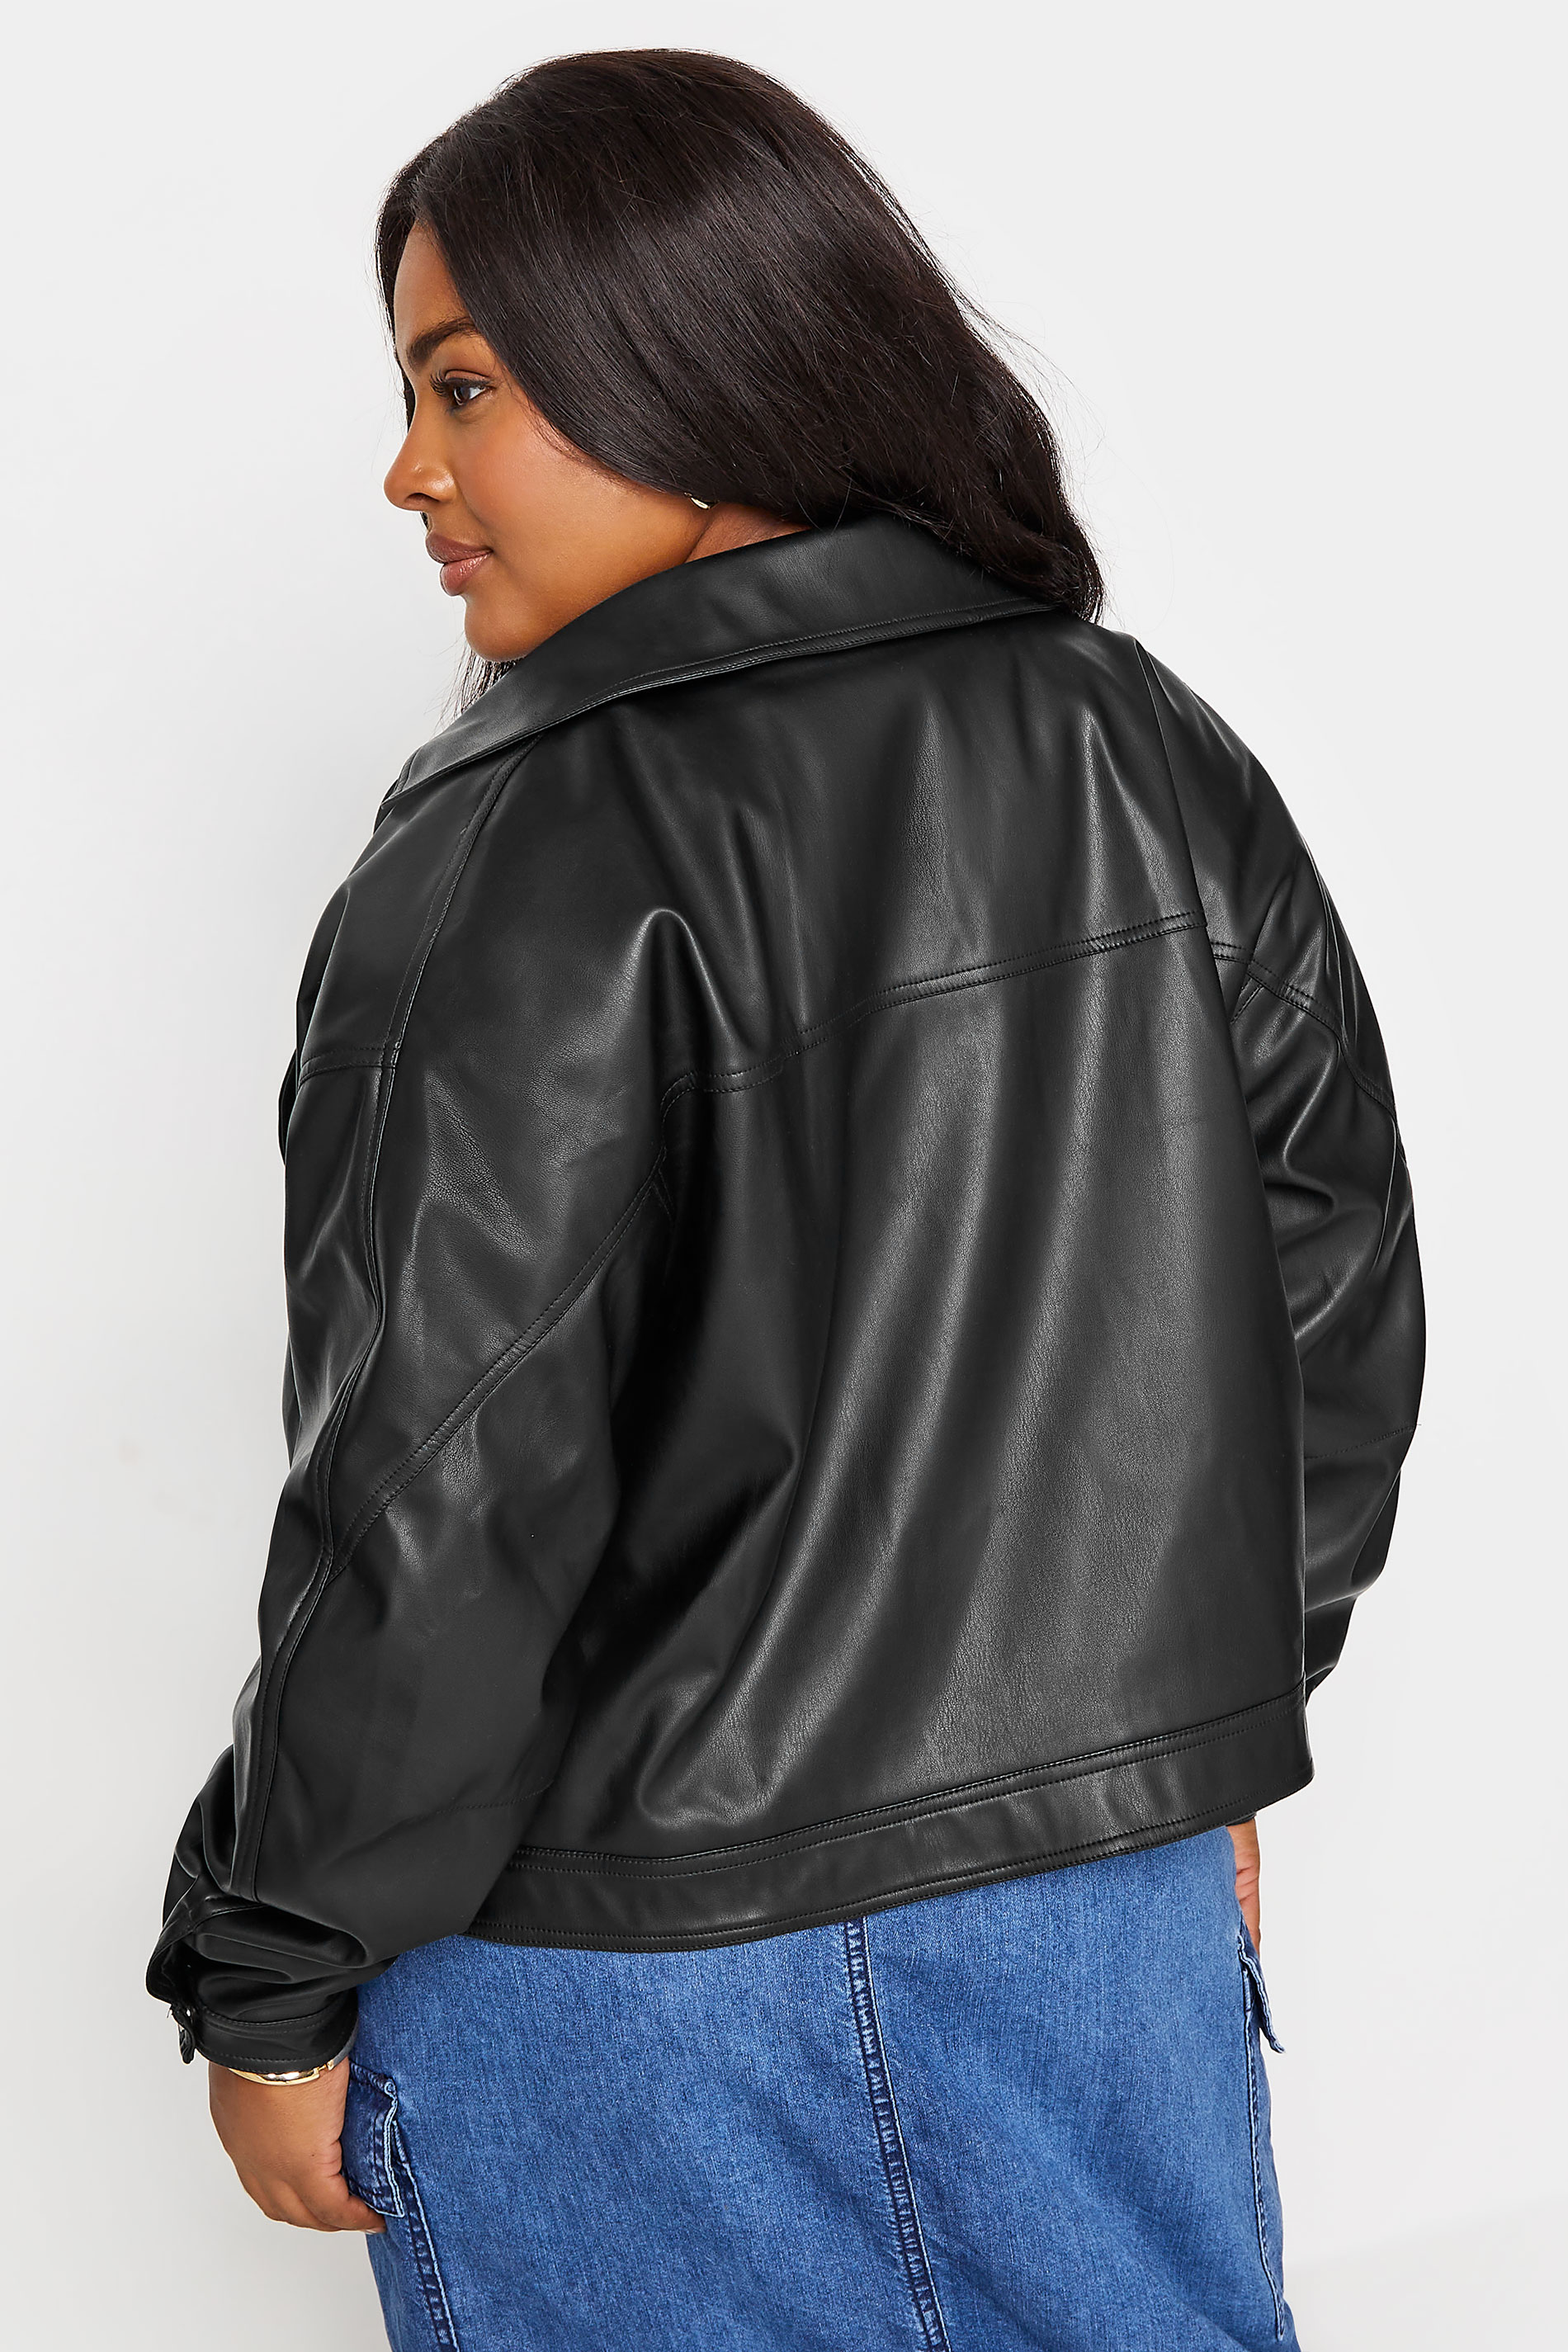 YOURS Plus Size Black Faux Leather Biker Jacket | Yours Clothing 3